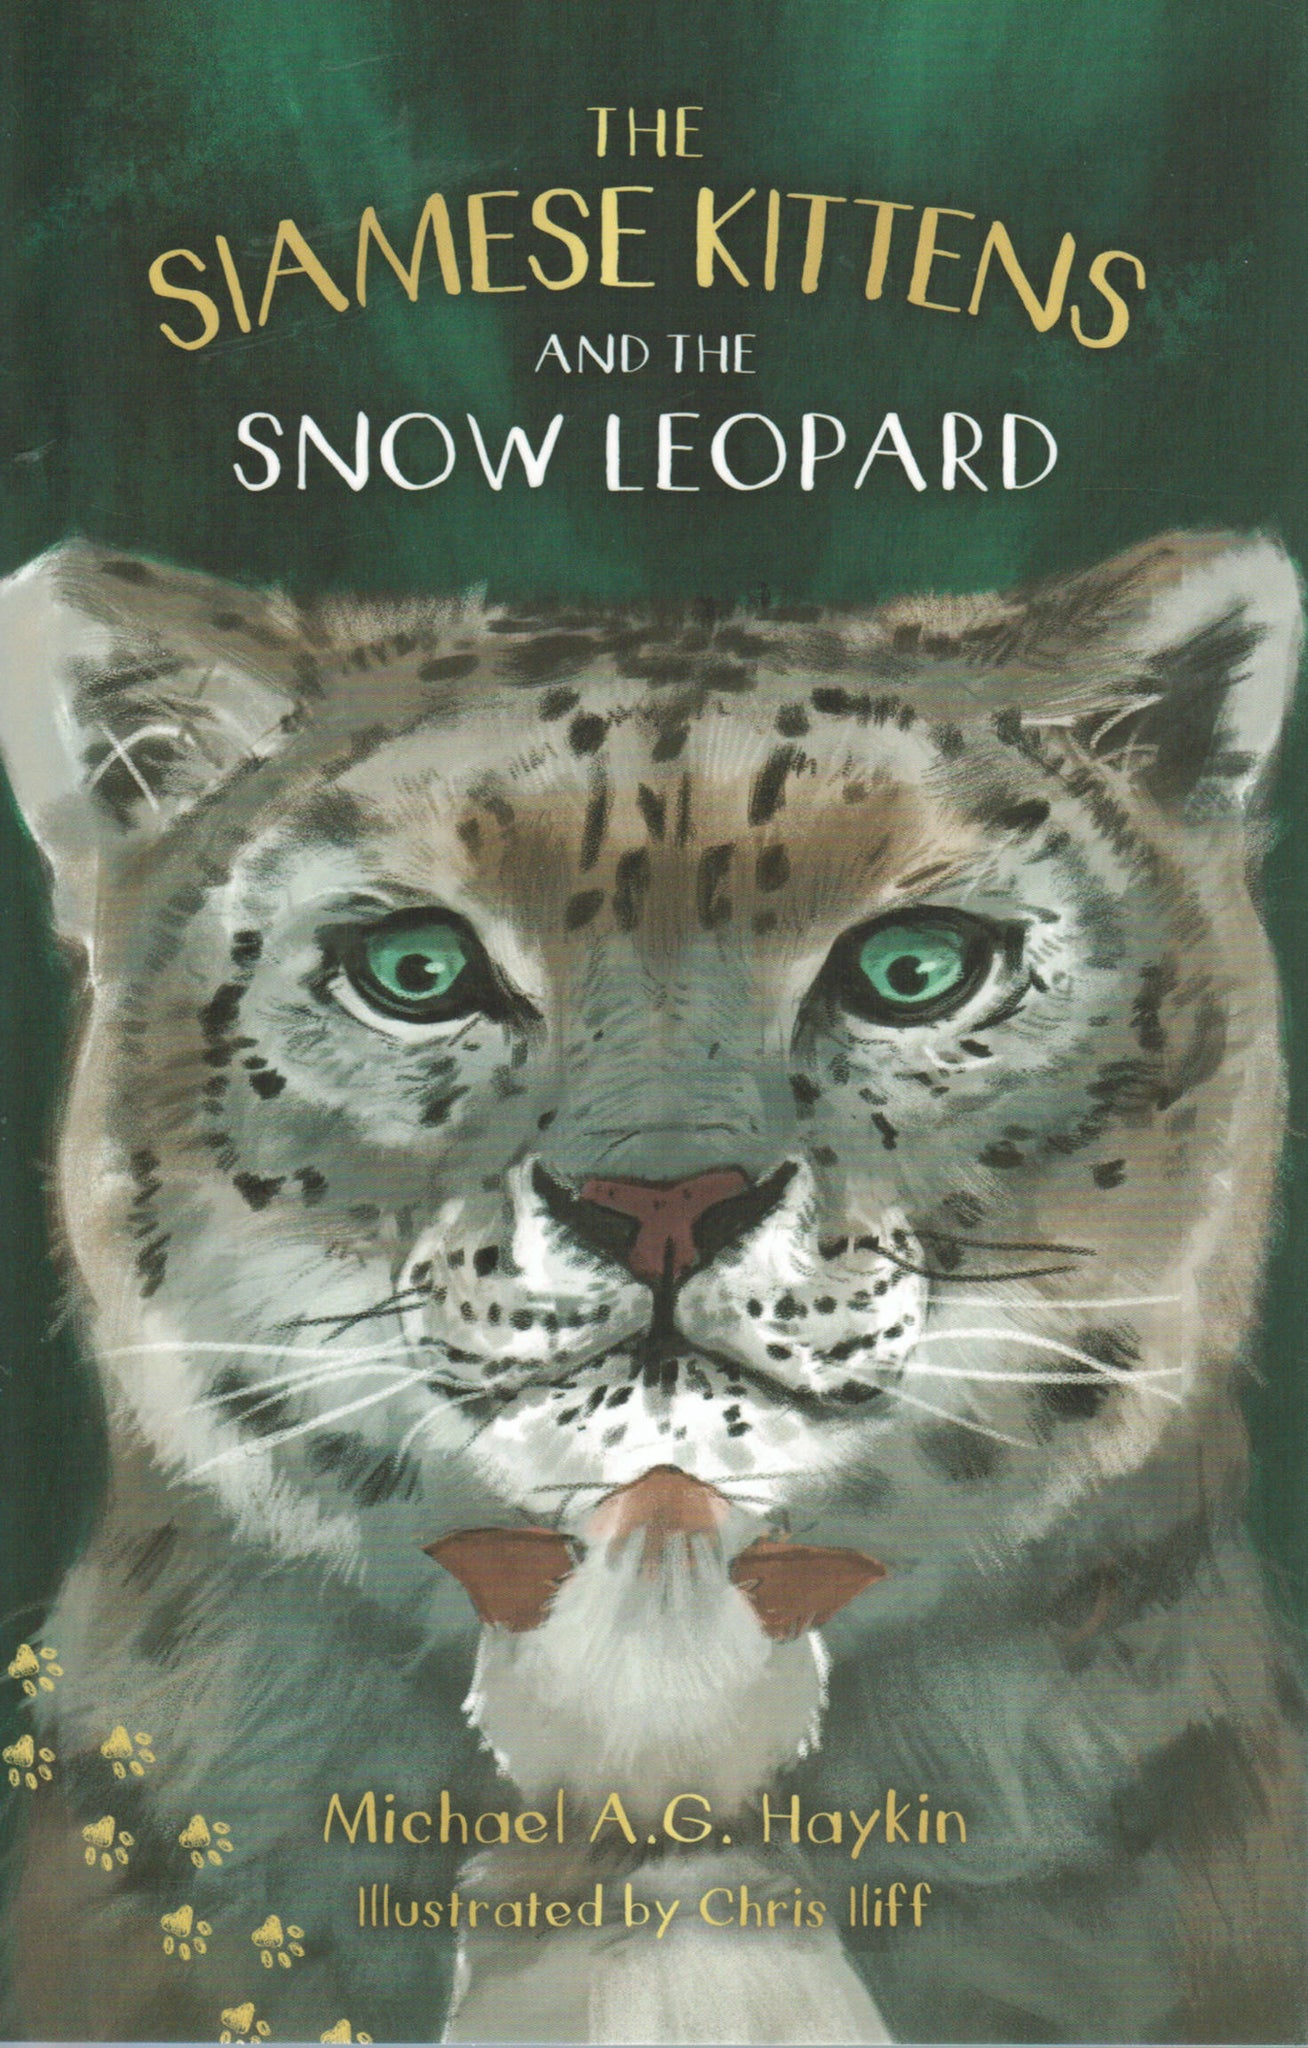 The Siamese Kittens and the Snow Leopard